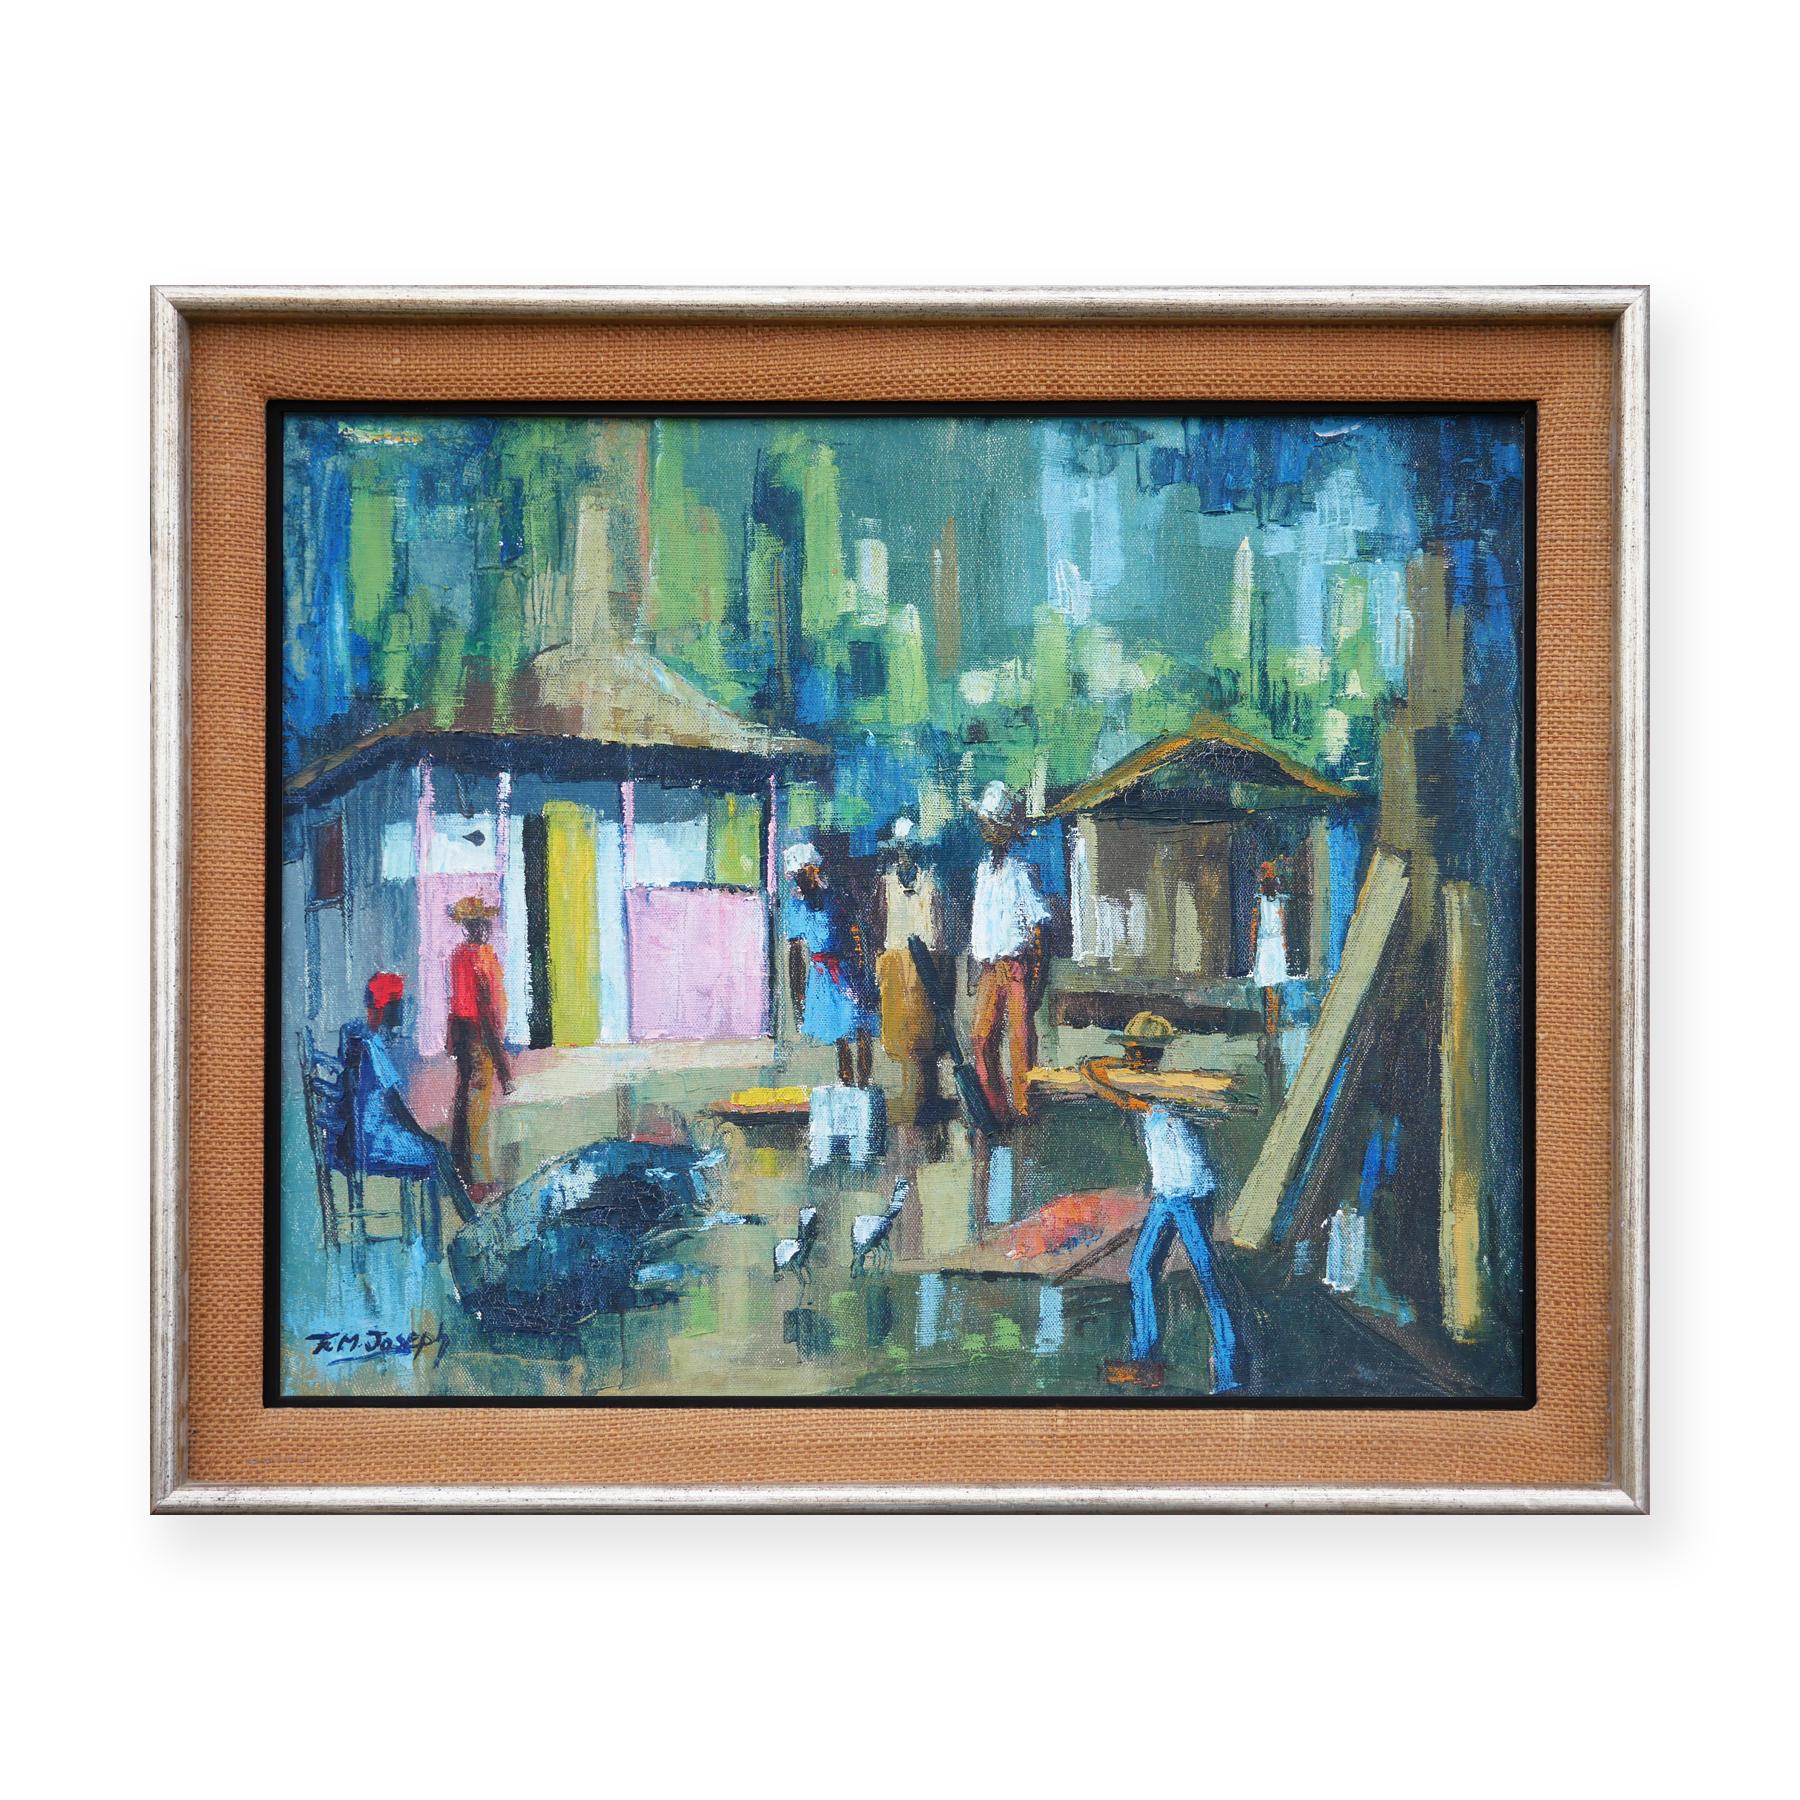 Post Impressionist Inspired Modern Blue & Green Abstract Village Landscape Scene - Painting by Franklin M. Joseph